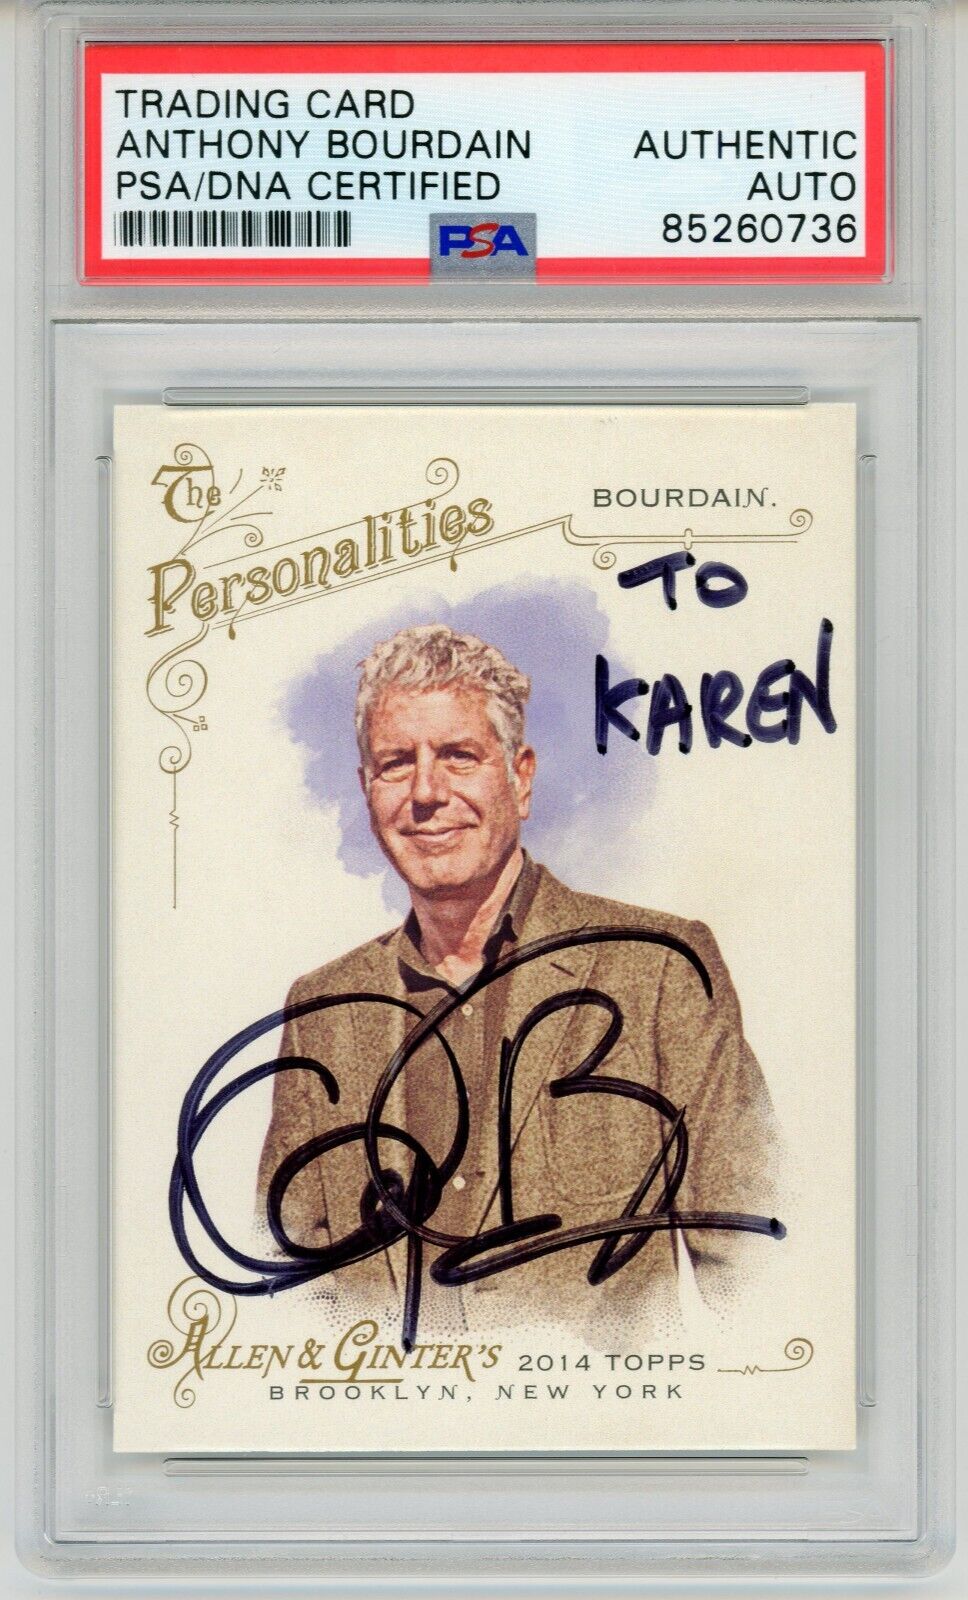 Anthony Bourdain ~ Signed Autographed 2014 Topps Trading Card Auto ~ PSA DNA